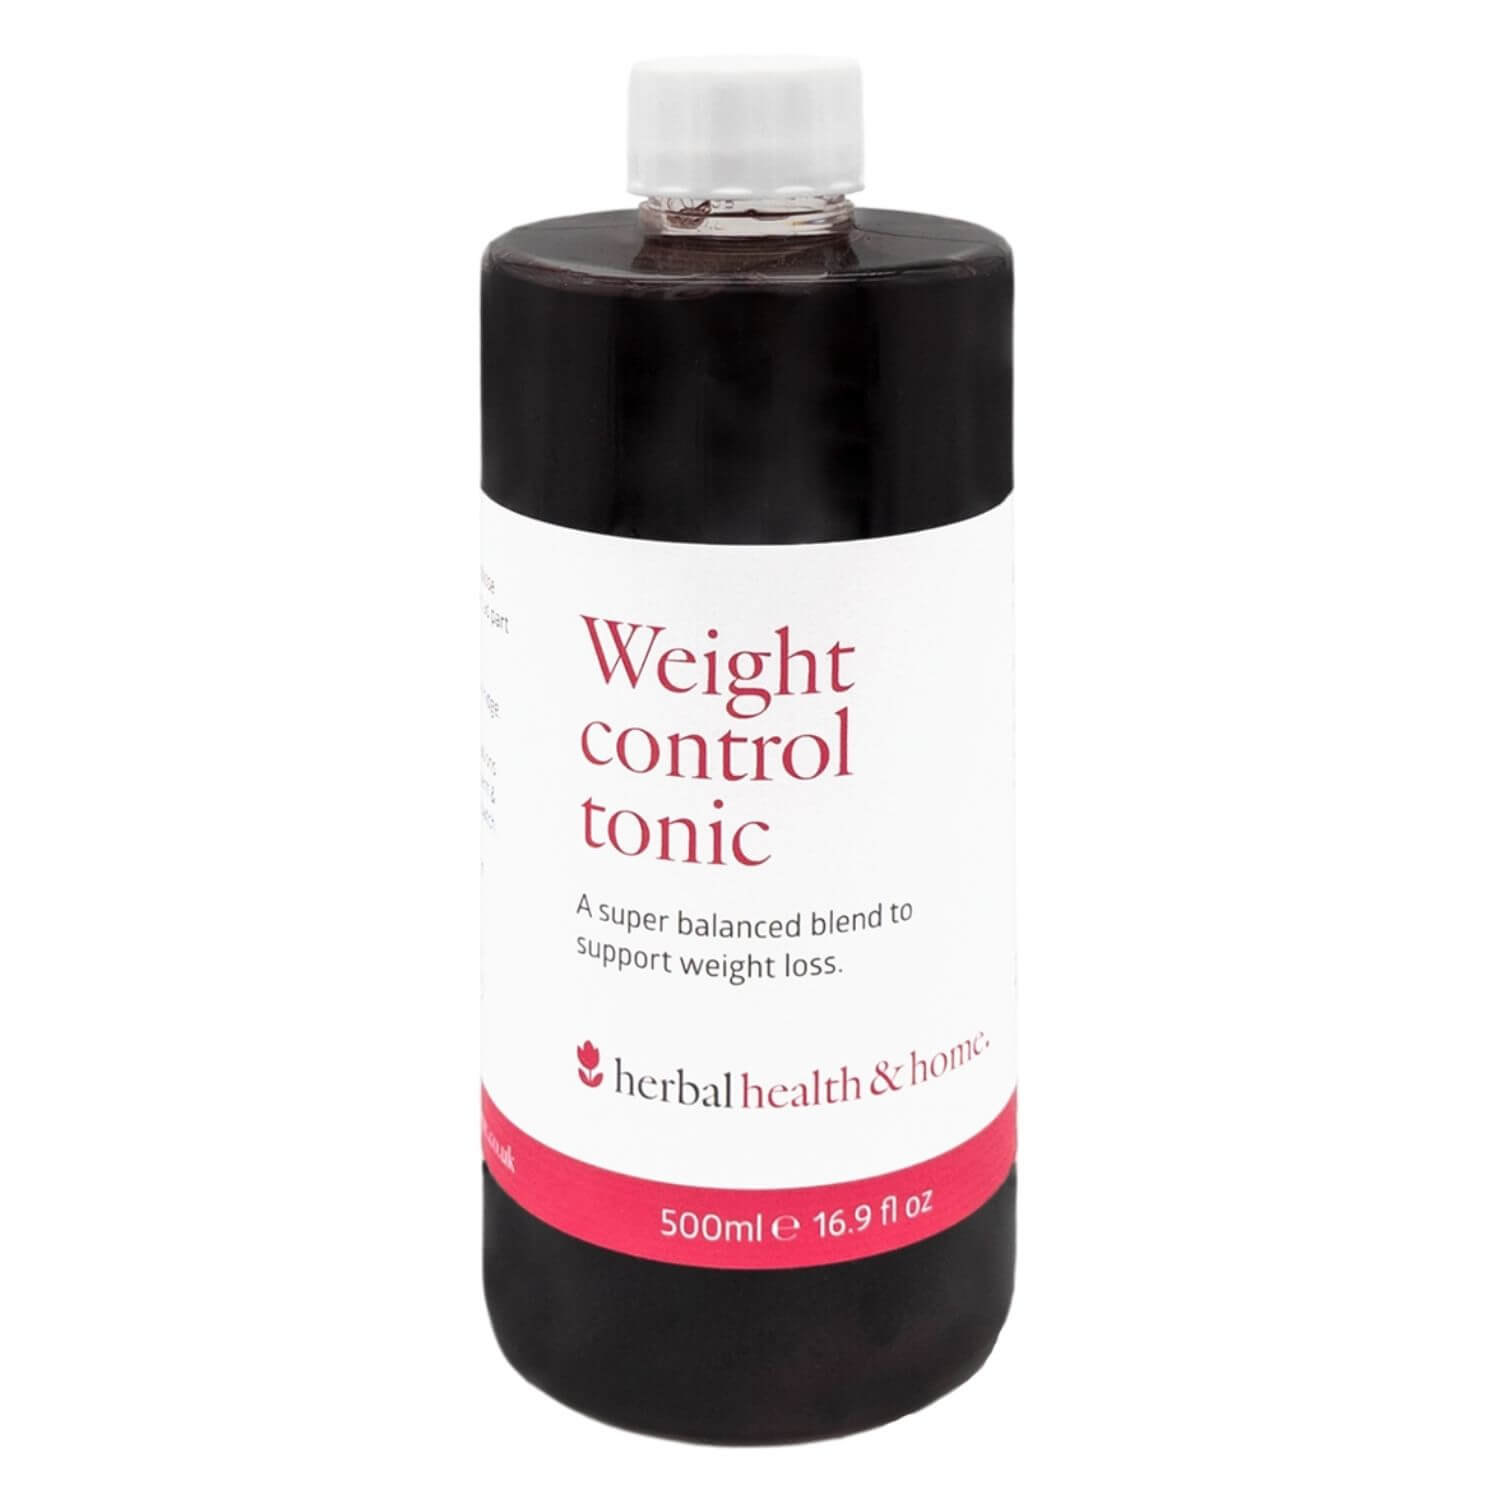 Weight Control Tonic | Herbal, Health & Home